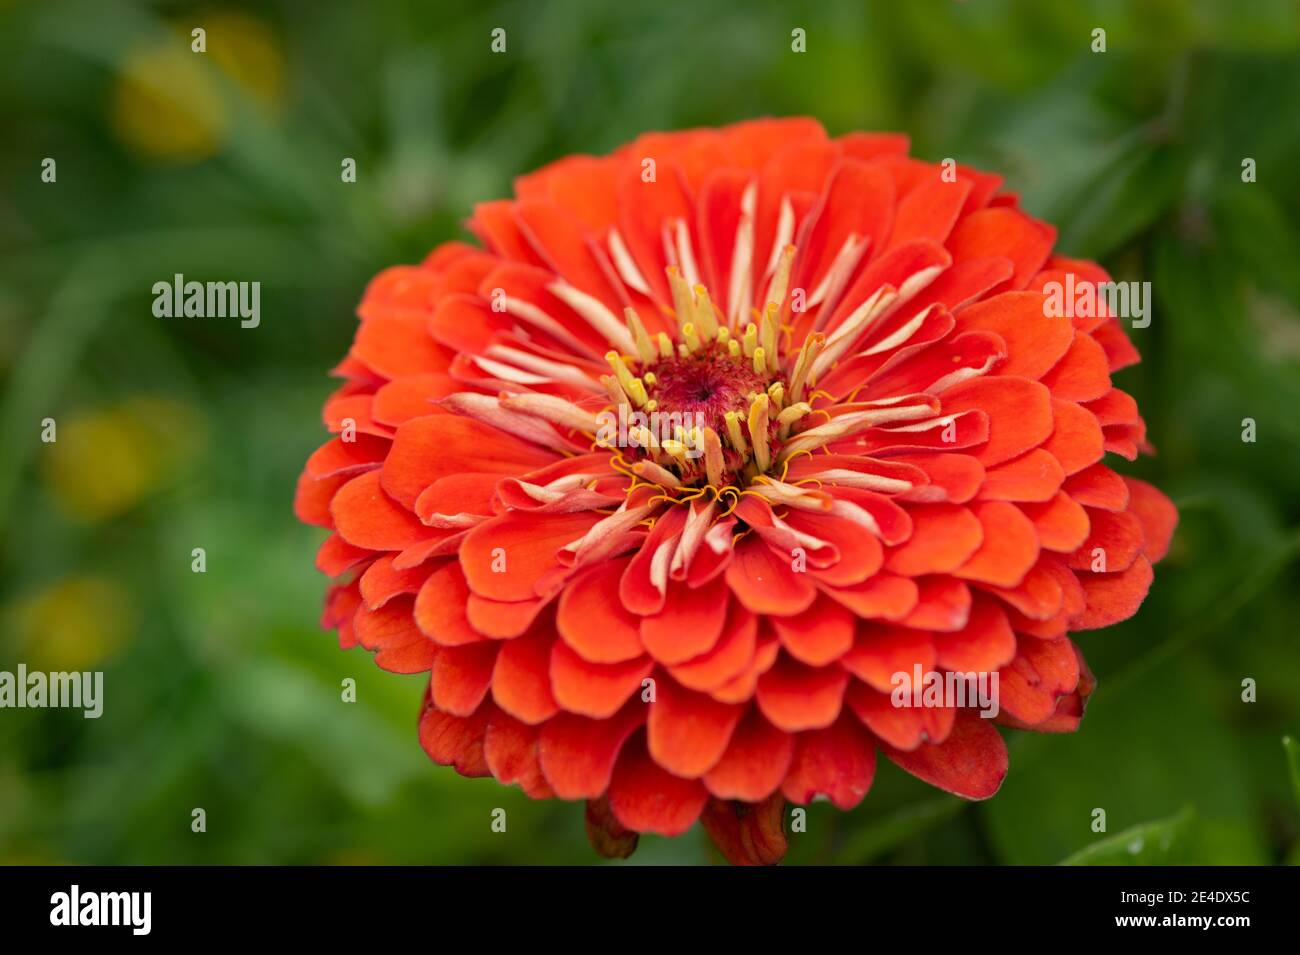 Red Dahlia flower close up blossom in the garden Stock Photo